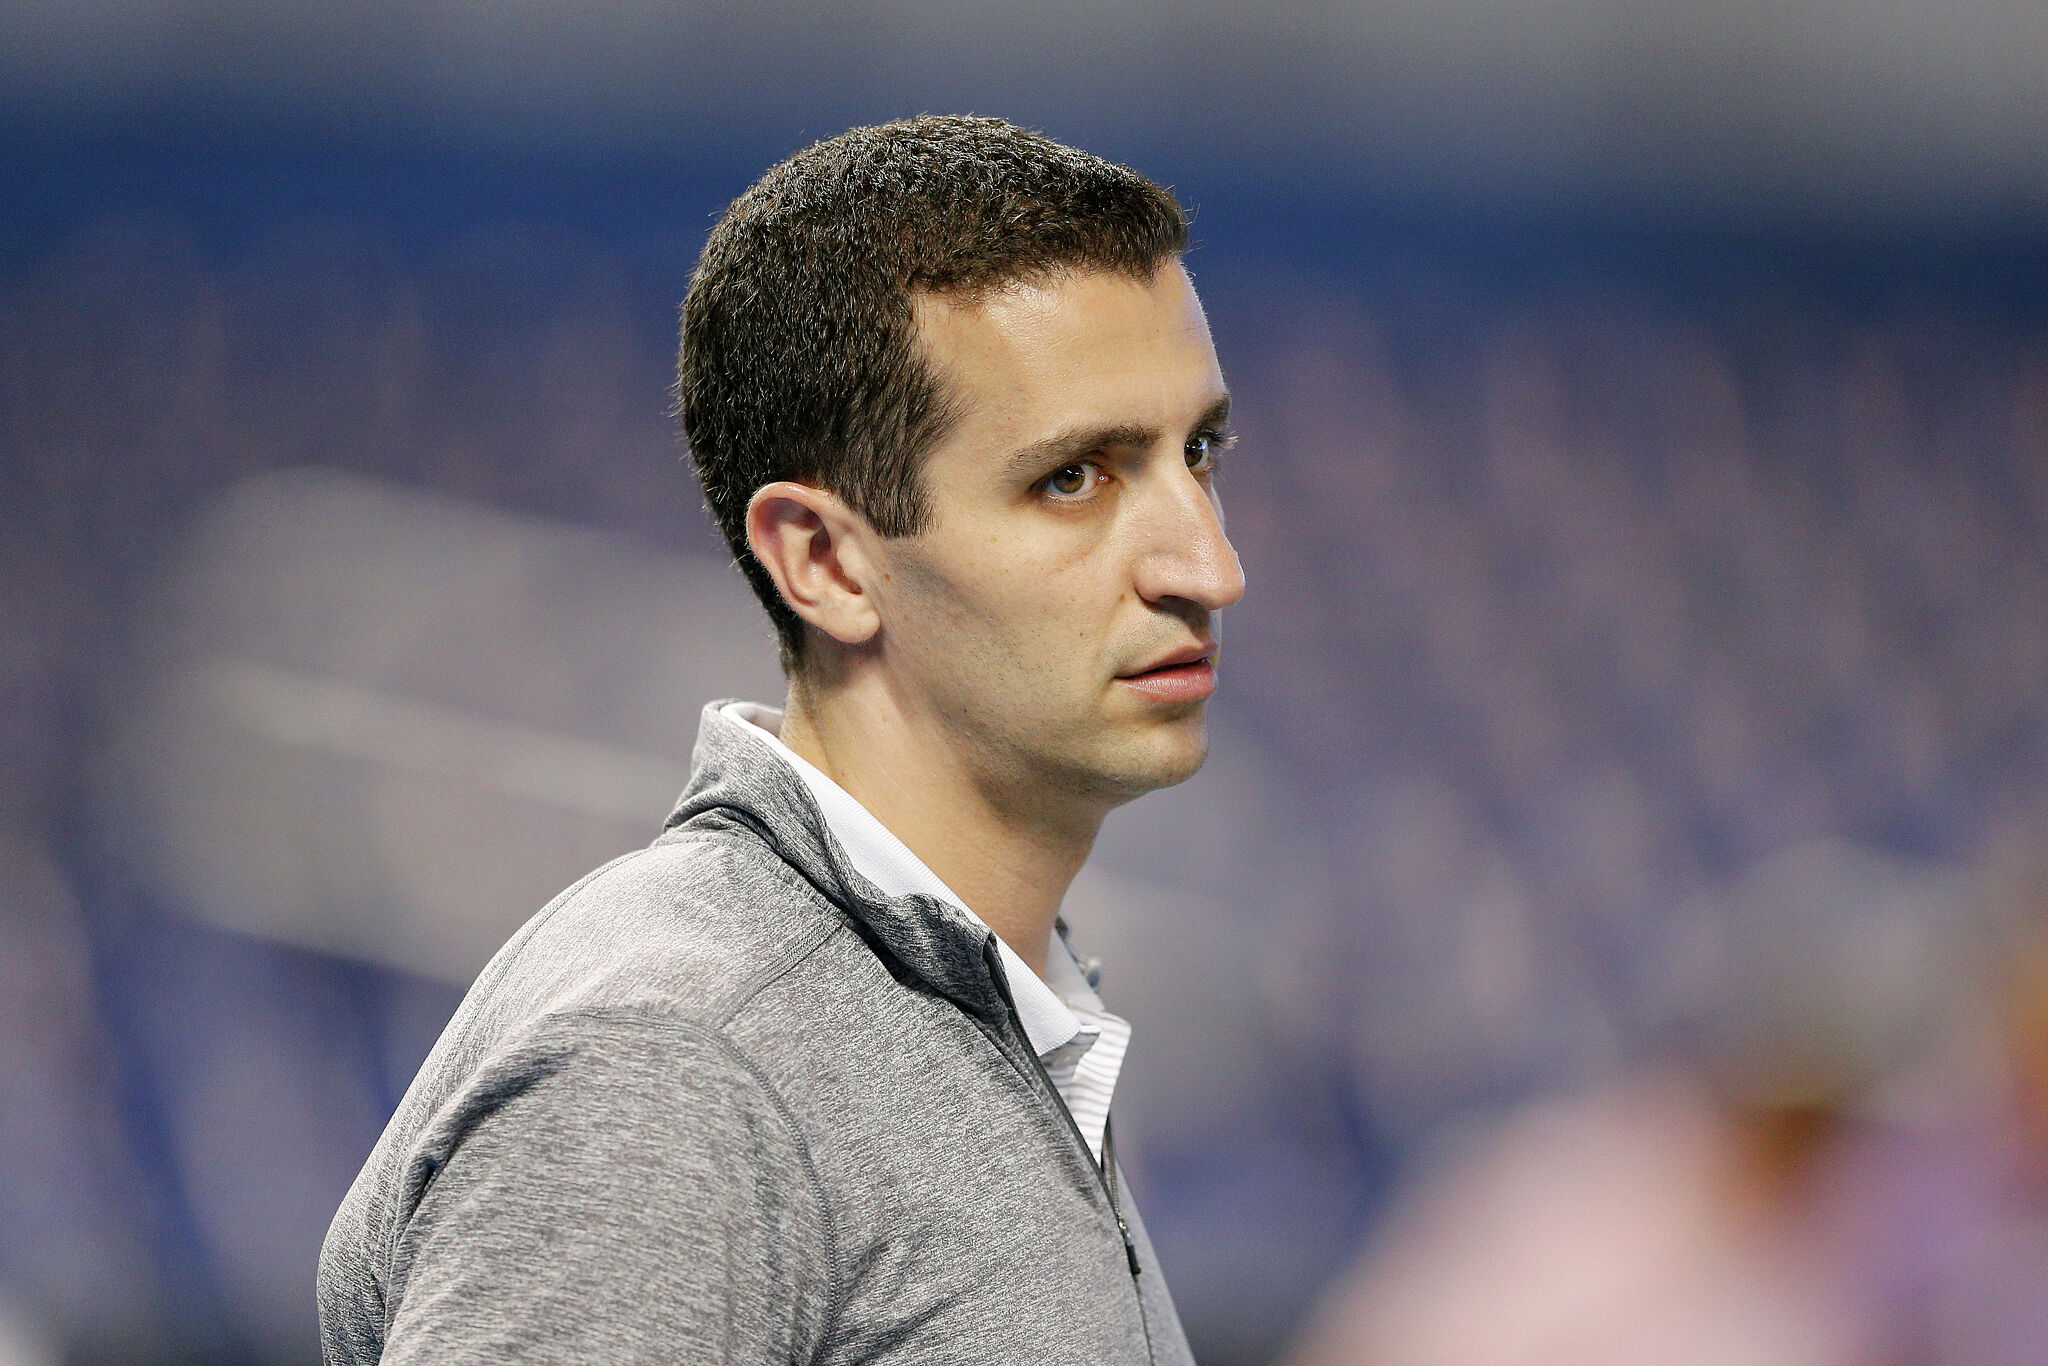 David Stearns Set To Join The Mets